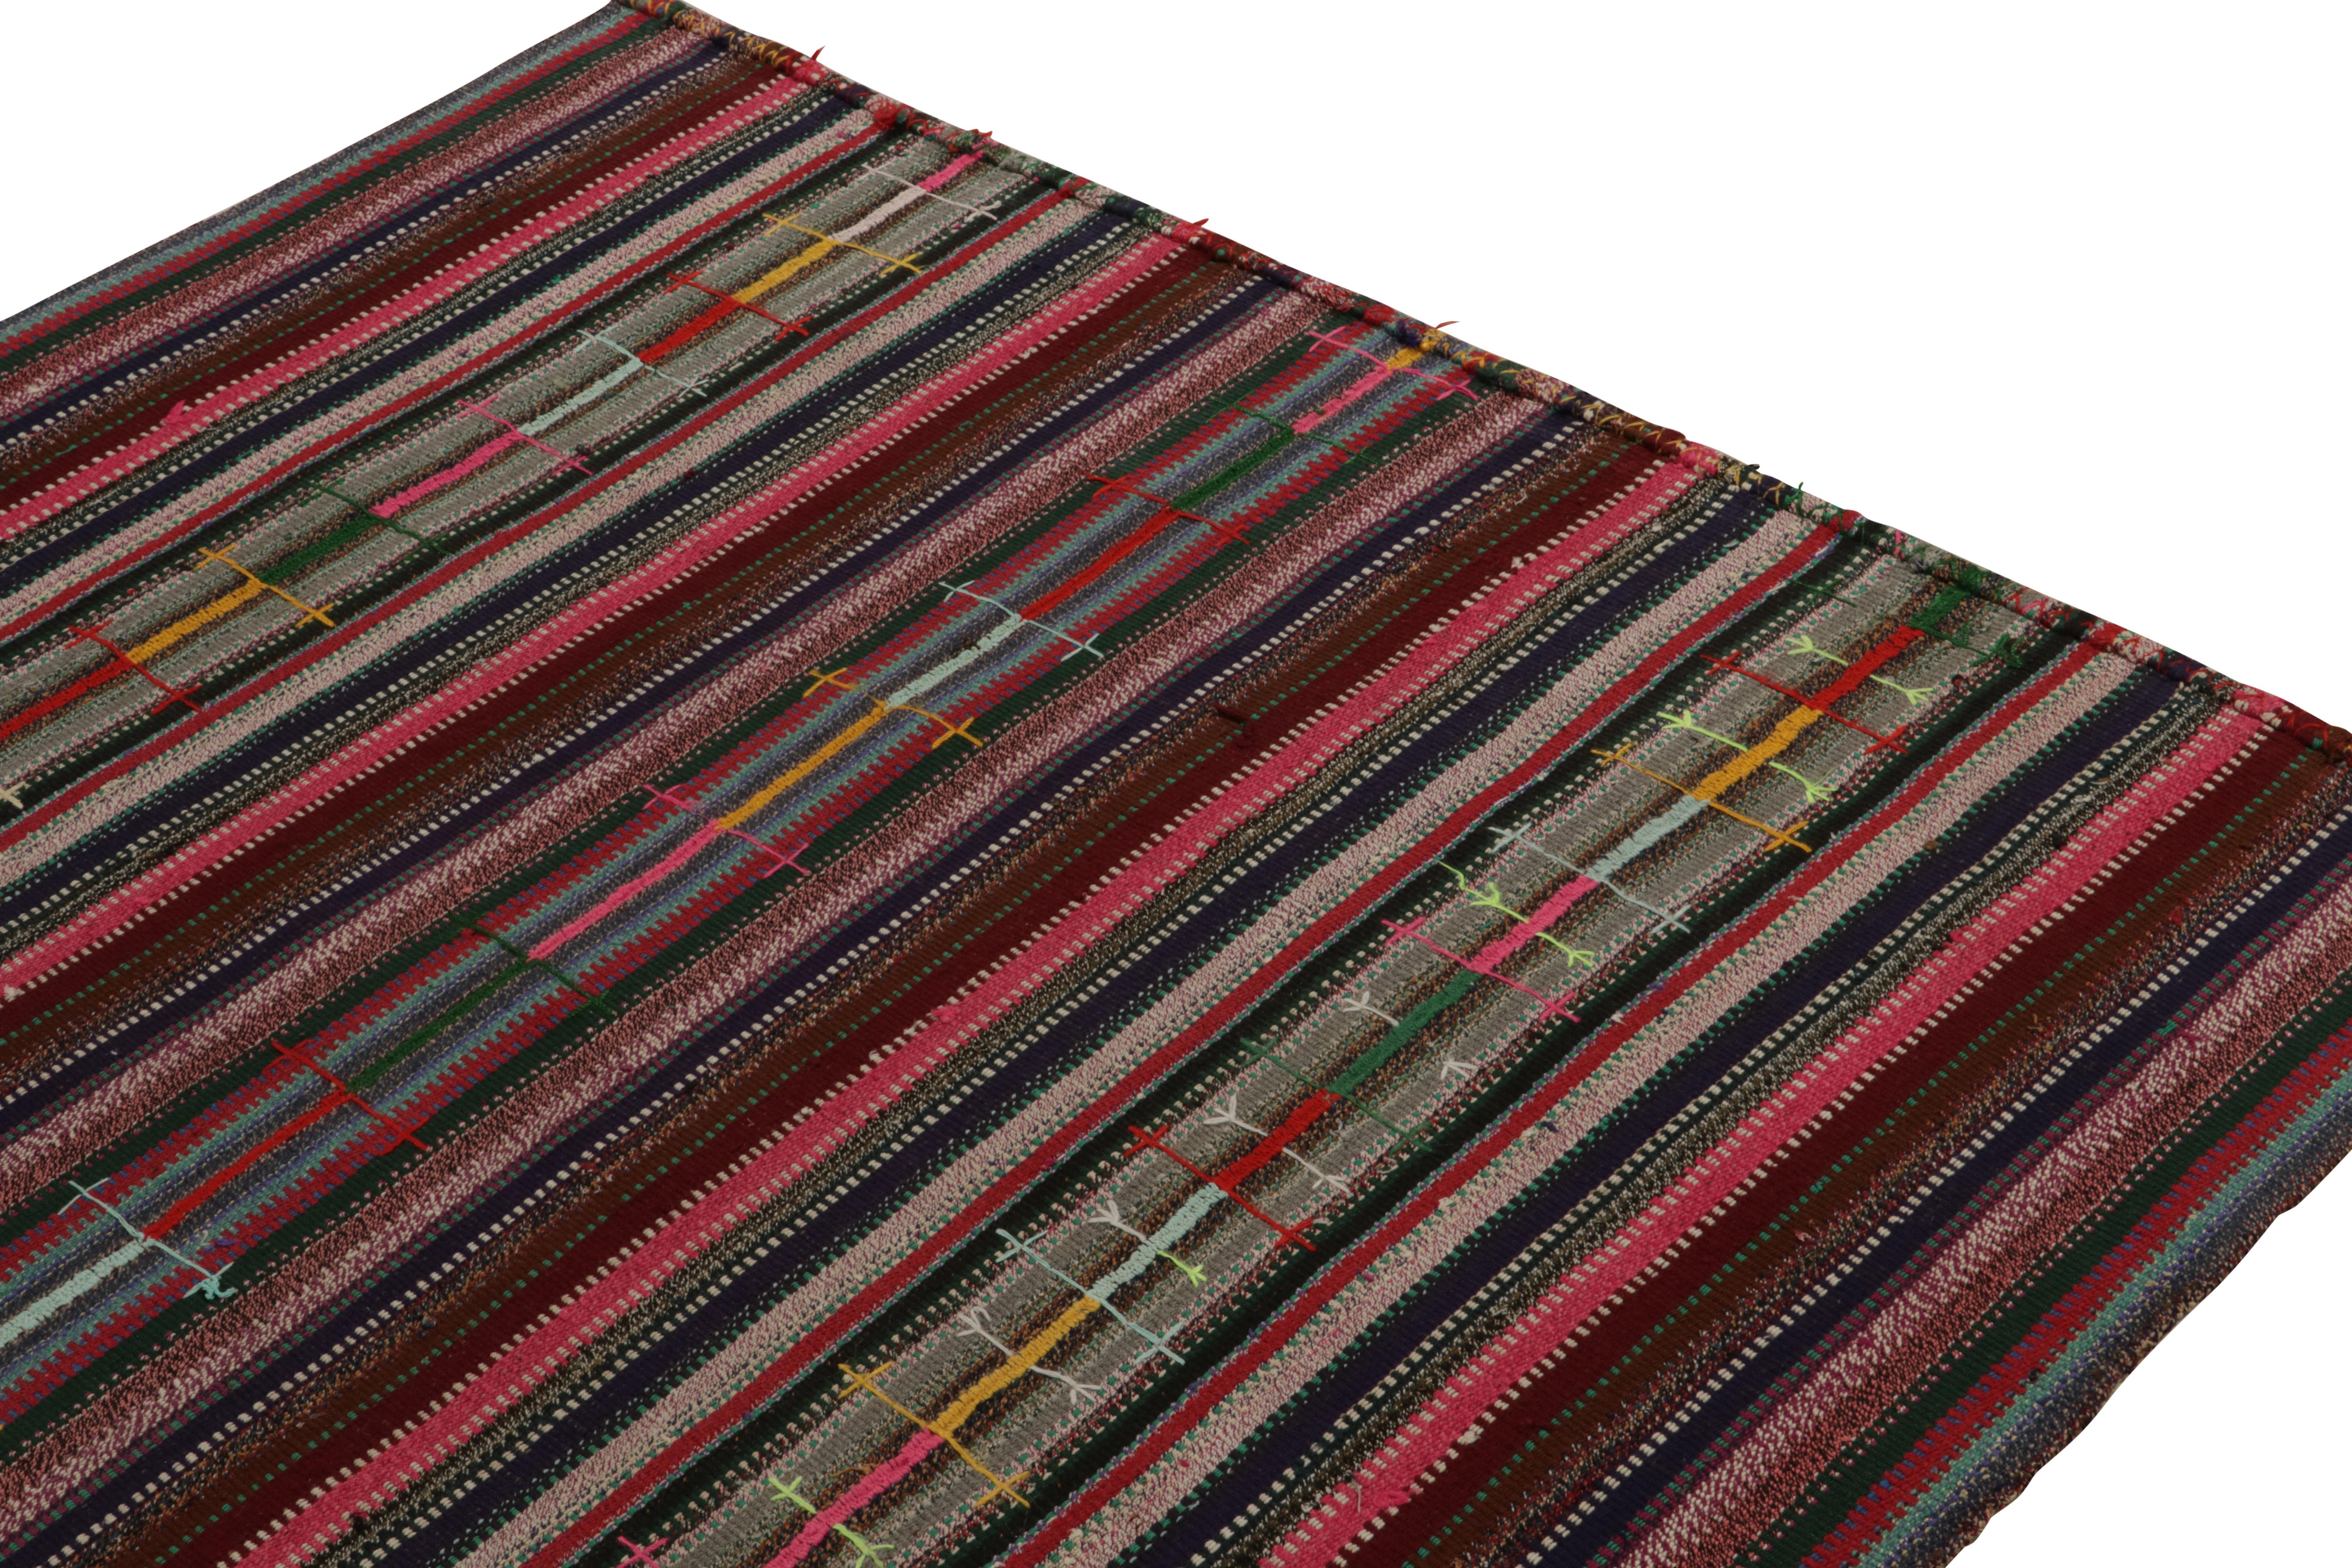 Hand-Knotted 1950s Vintage Chaput Kilim Rug in Multicolor Striped Patterns, by Rug & Kilim For Sale